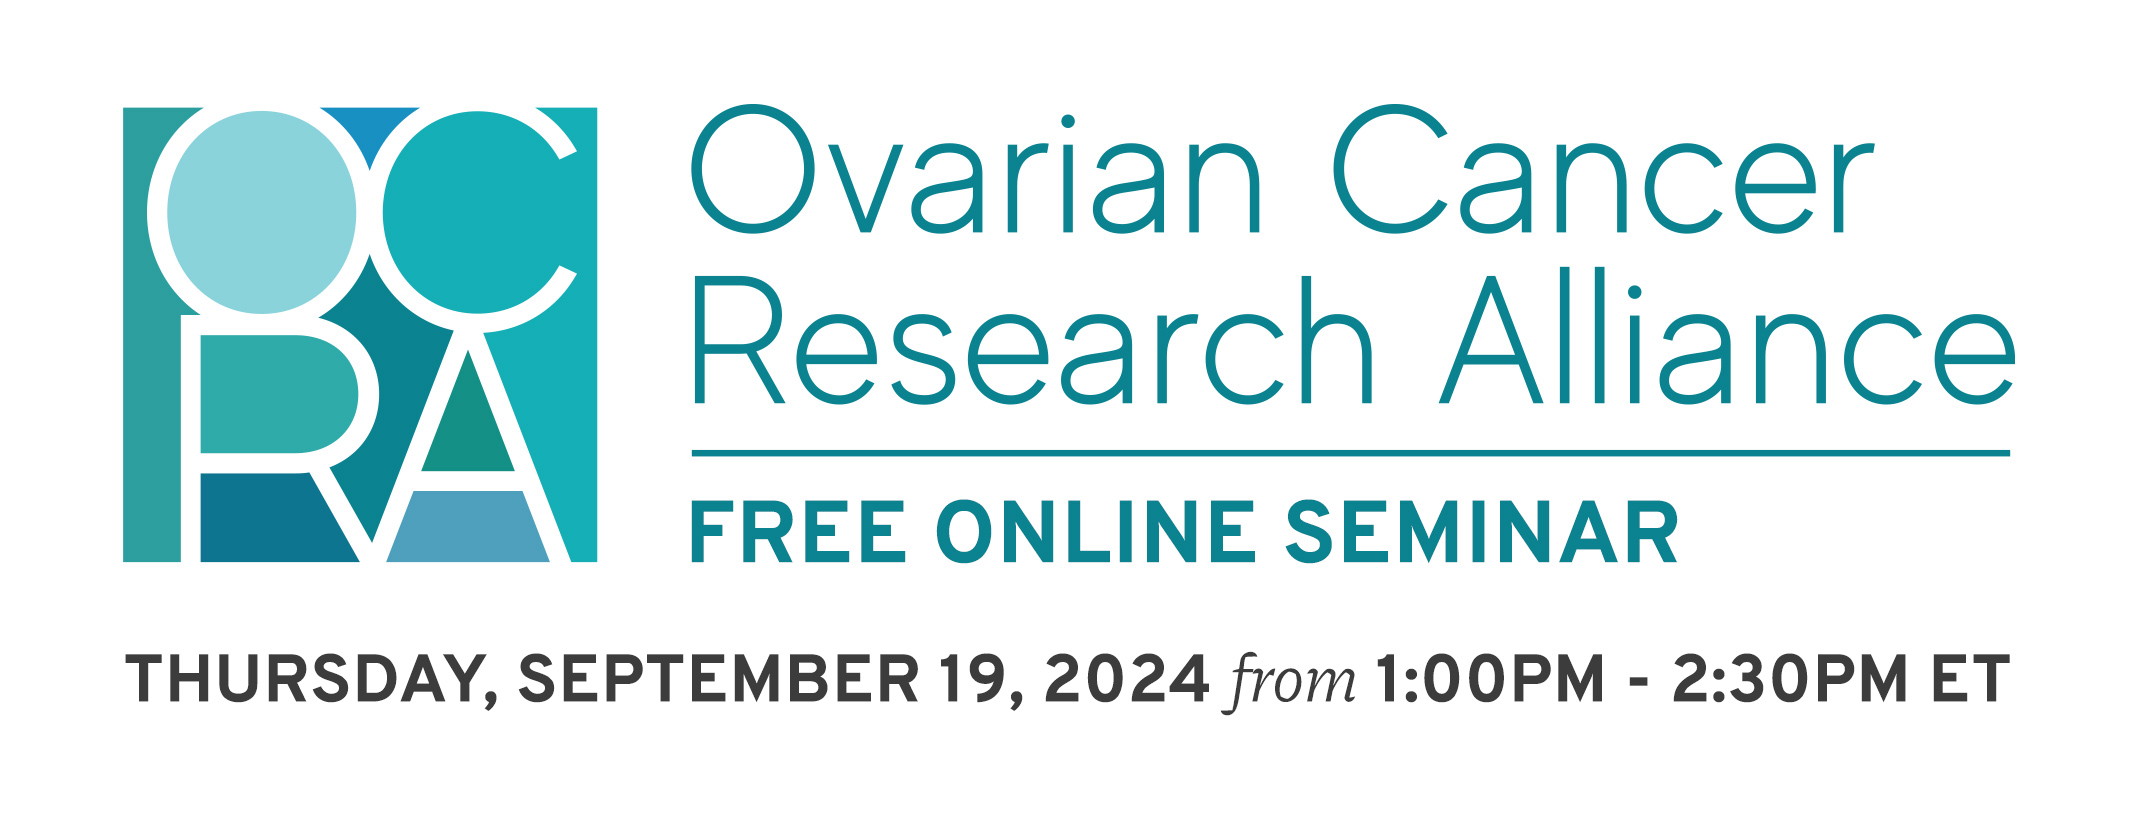 Ovarian Cancer Research Alliance Free Online Seminar: Thursday September 19, 2024 from 1:00PM - 2:30PM